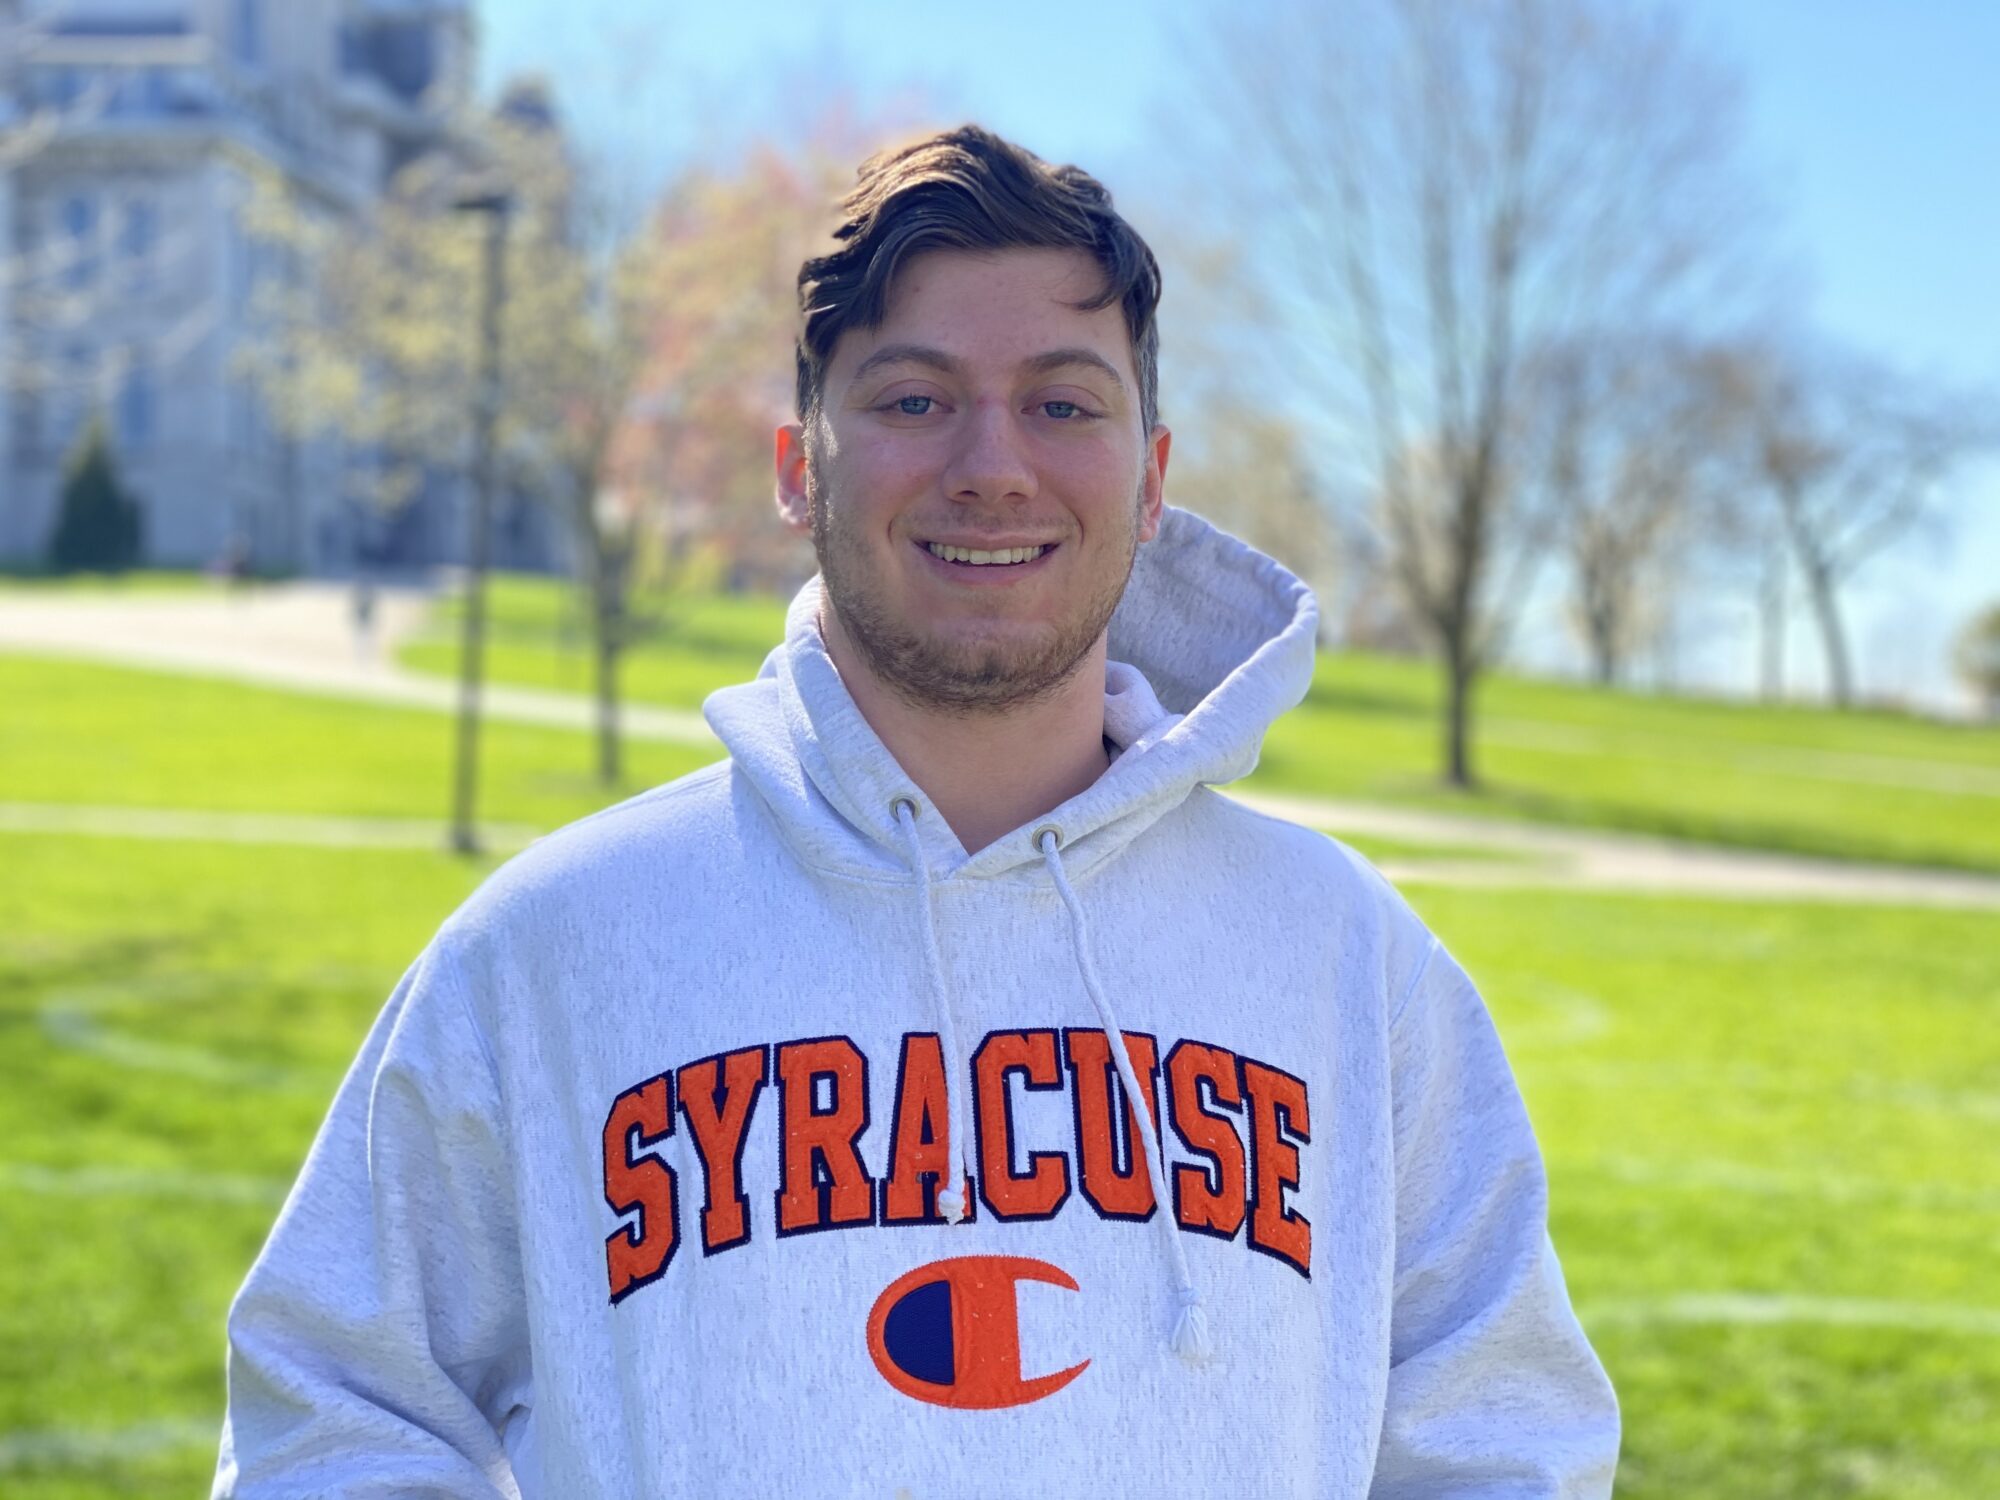 man wearing a Syracuse sweatshirt smiling in front of a grass field